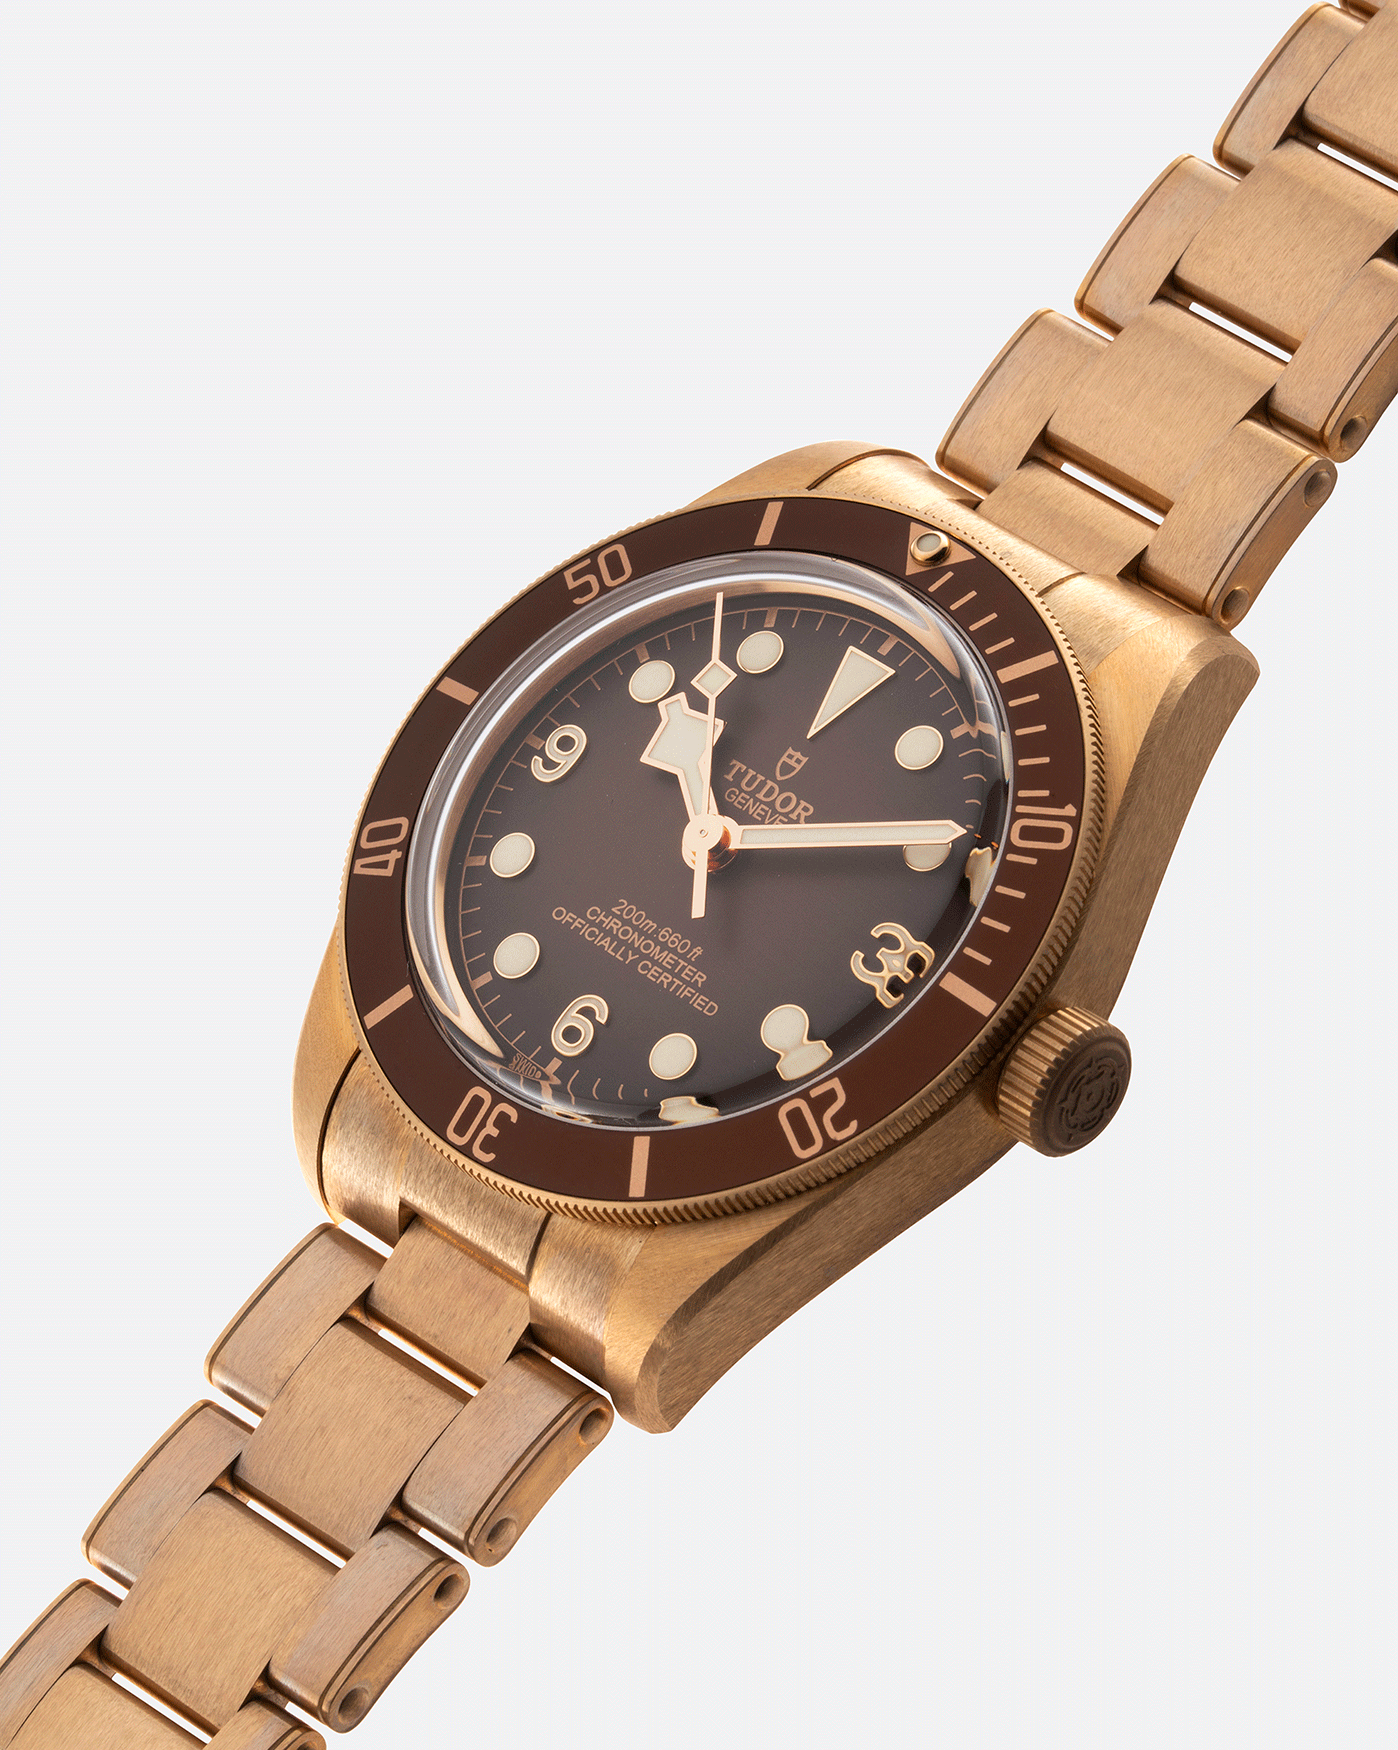 Christopher Ward C65 Dune Bronze Watch Review - Oracle Time